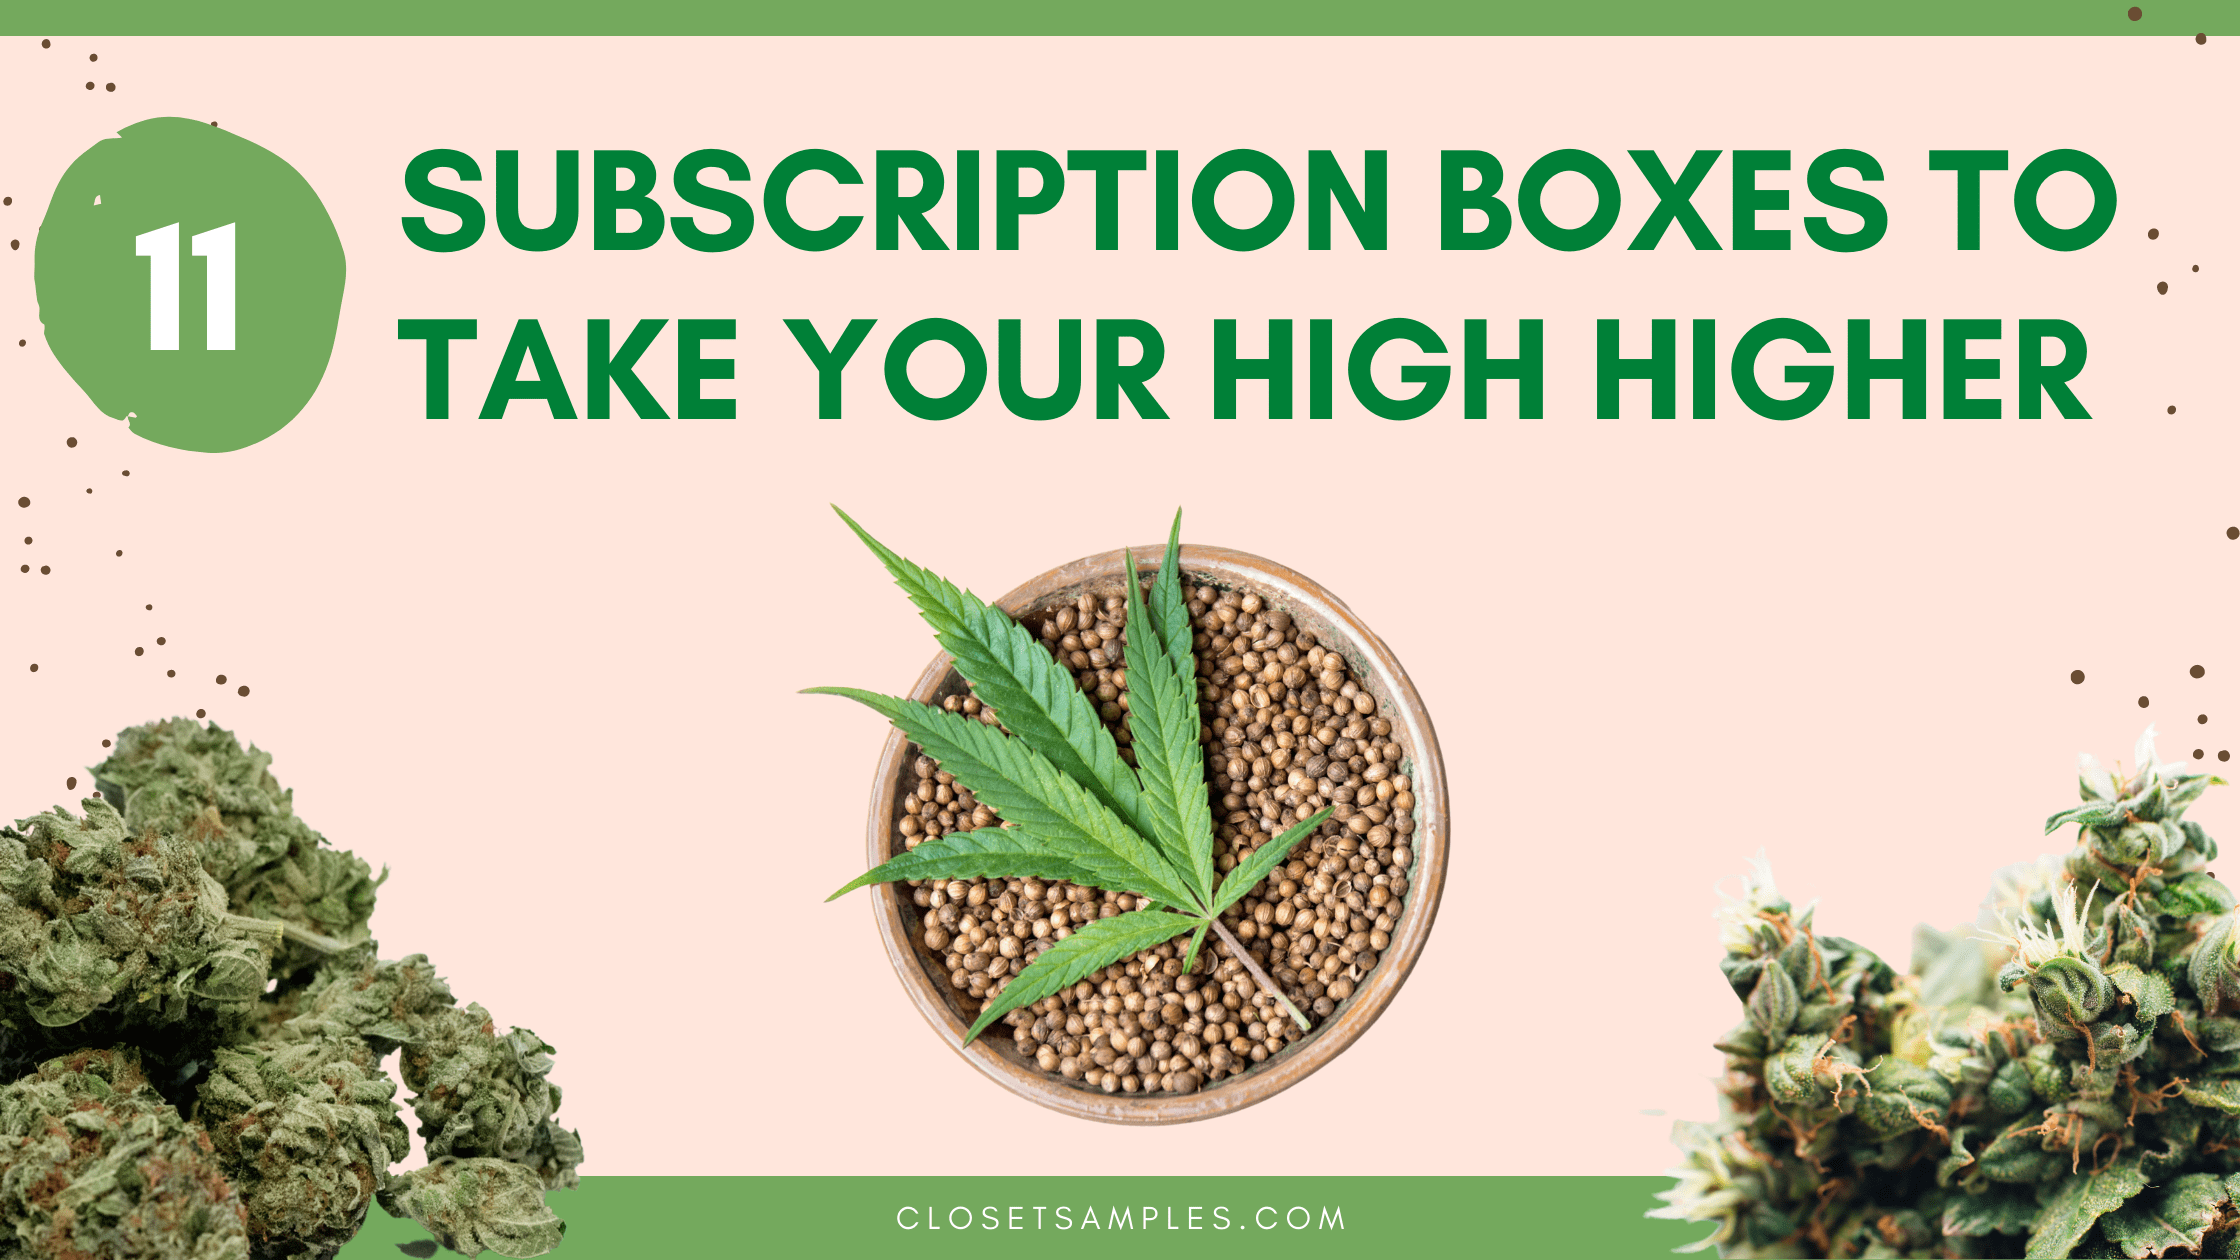 11-Weed-Subscription-Boxes-to-Take-Your-High-Higher-Cratejoy-Closetsamples.png